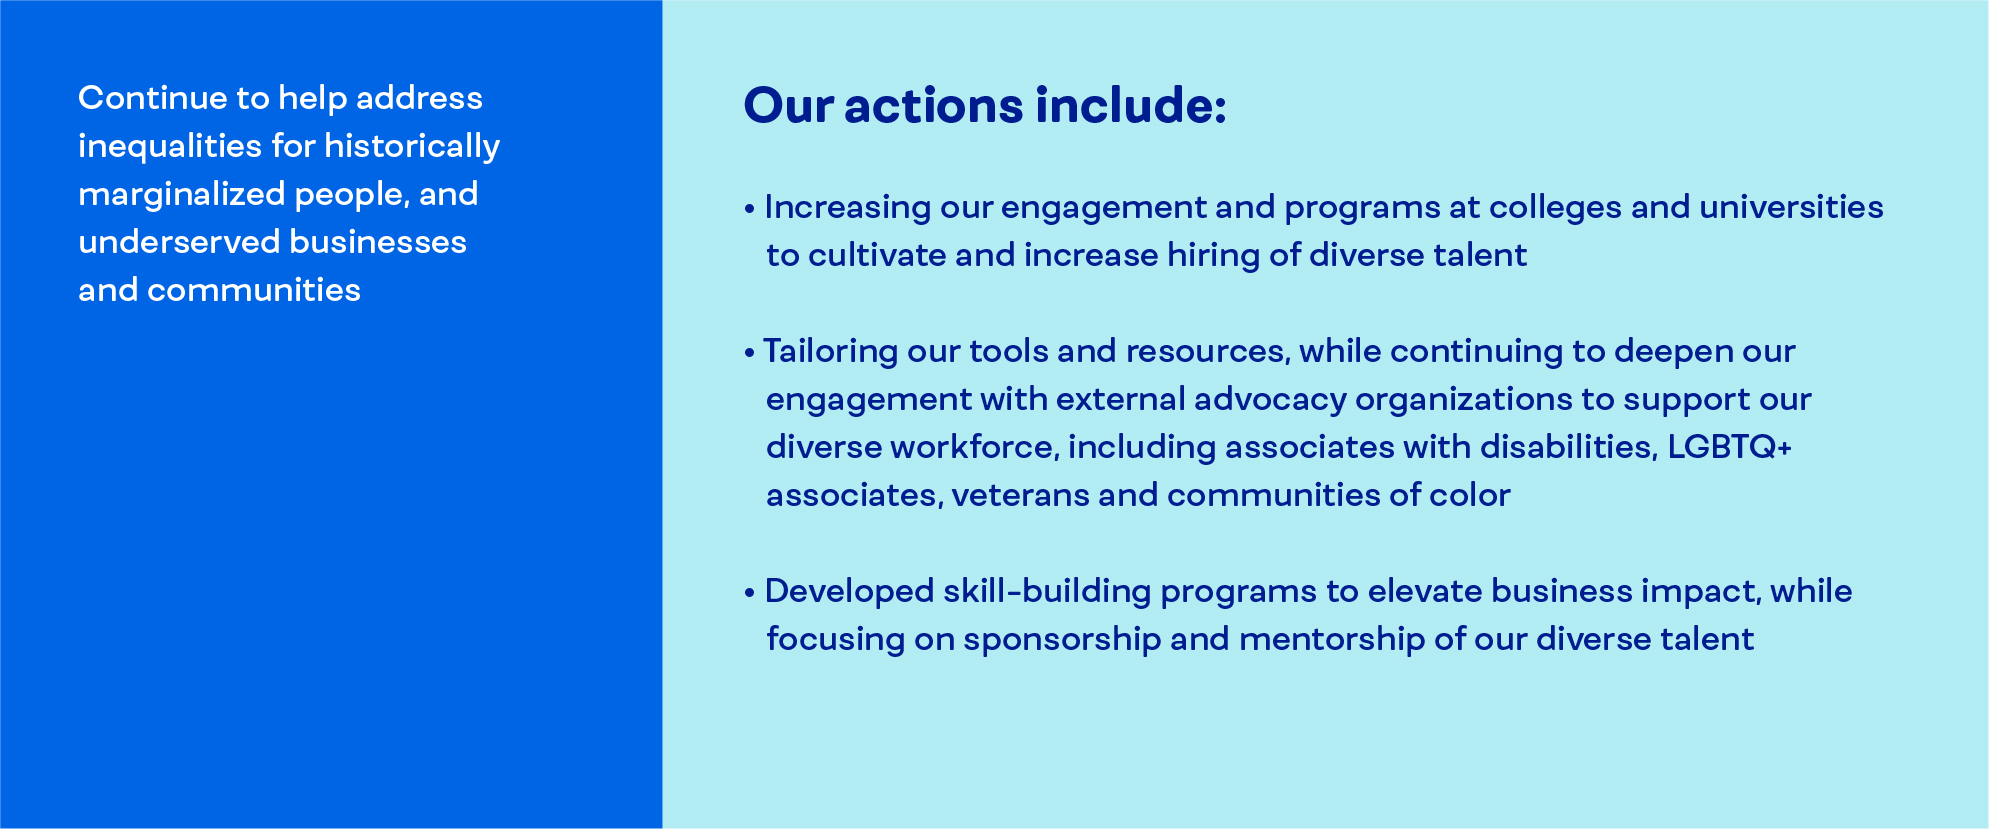 Continue to help address inequalities for historically excluded people, and underserved businesses and communities. Supported additional underserved communities.